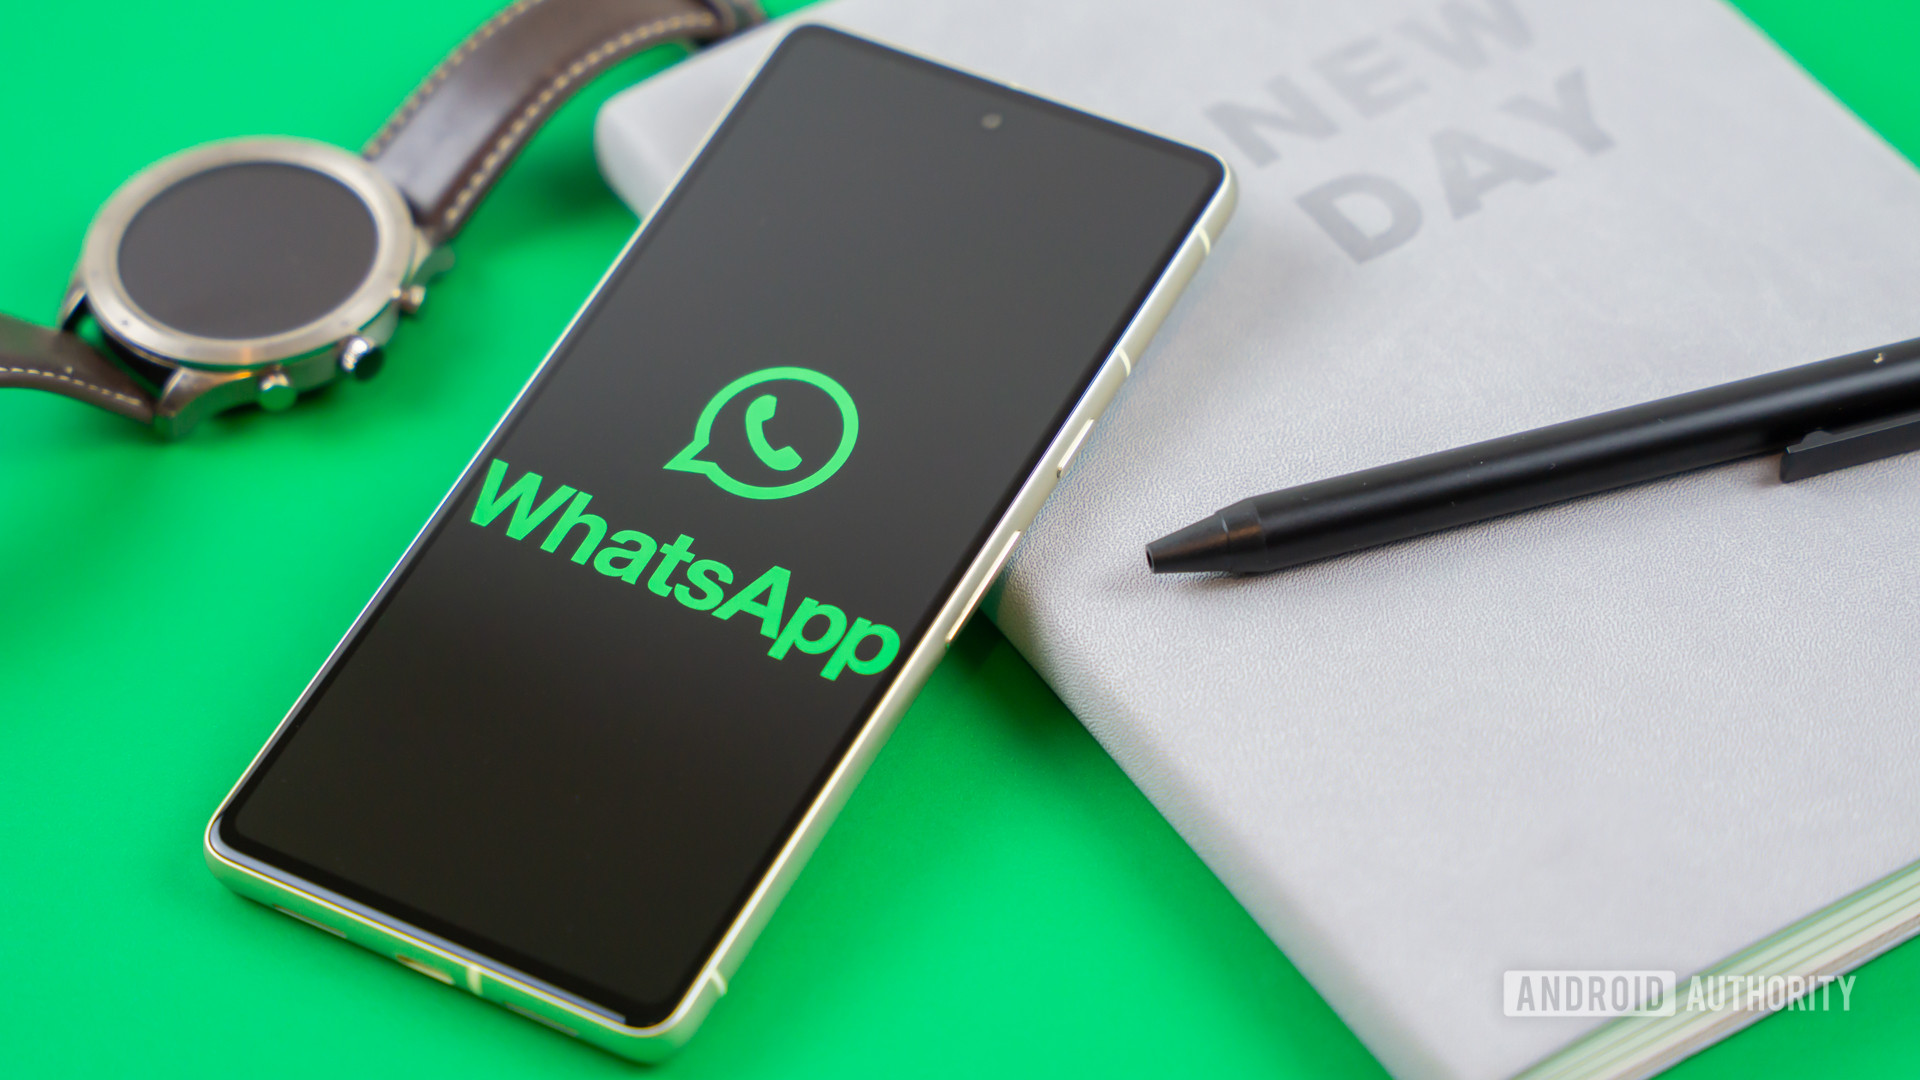 From video messages to HD photos, WhatsApp is working on several new features